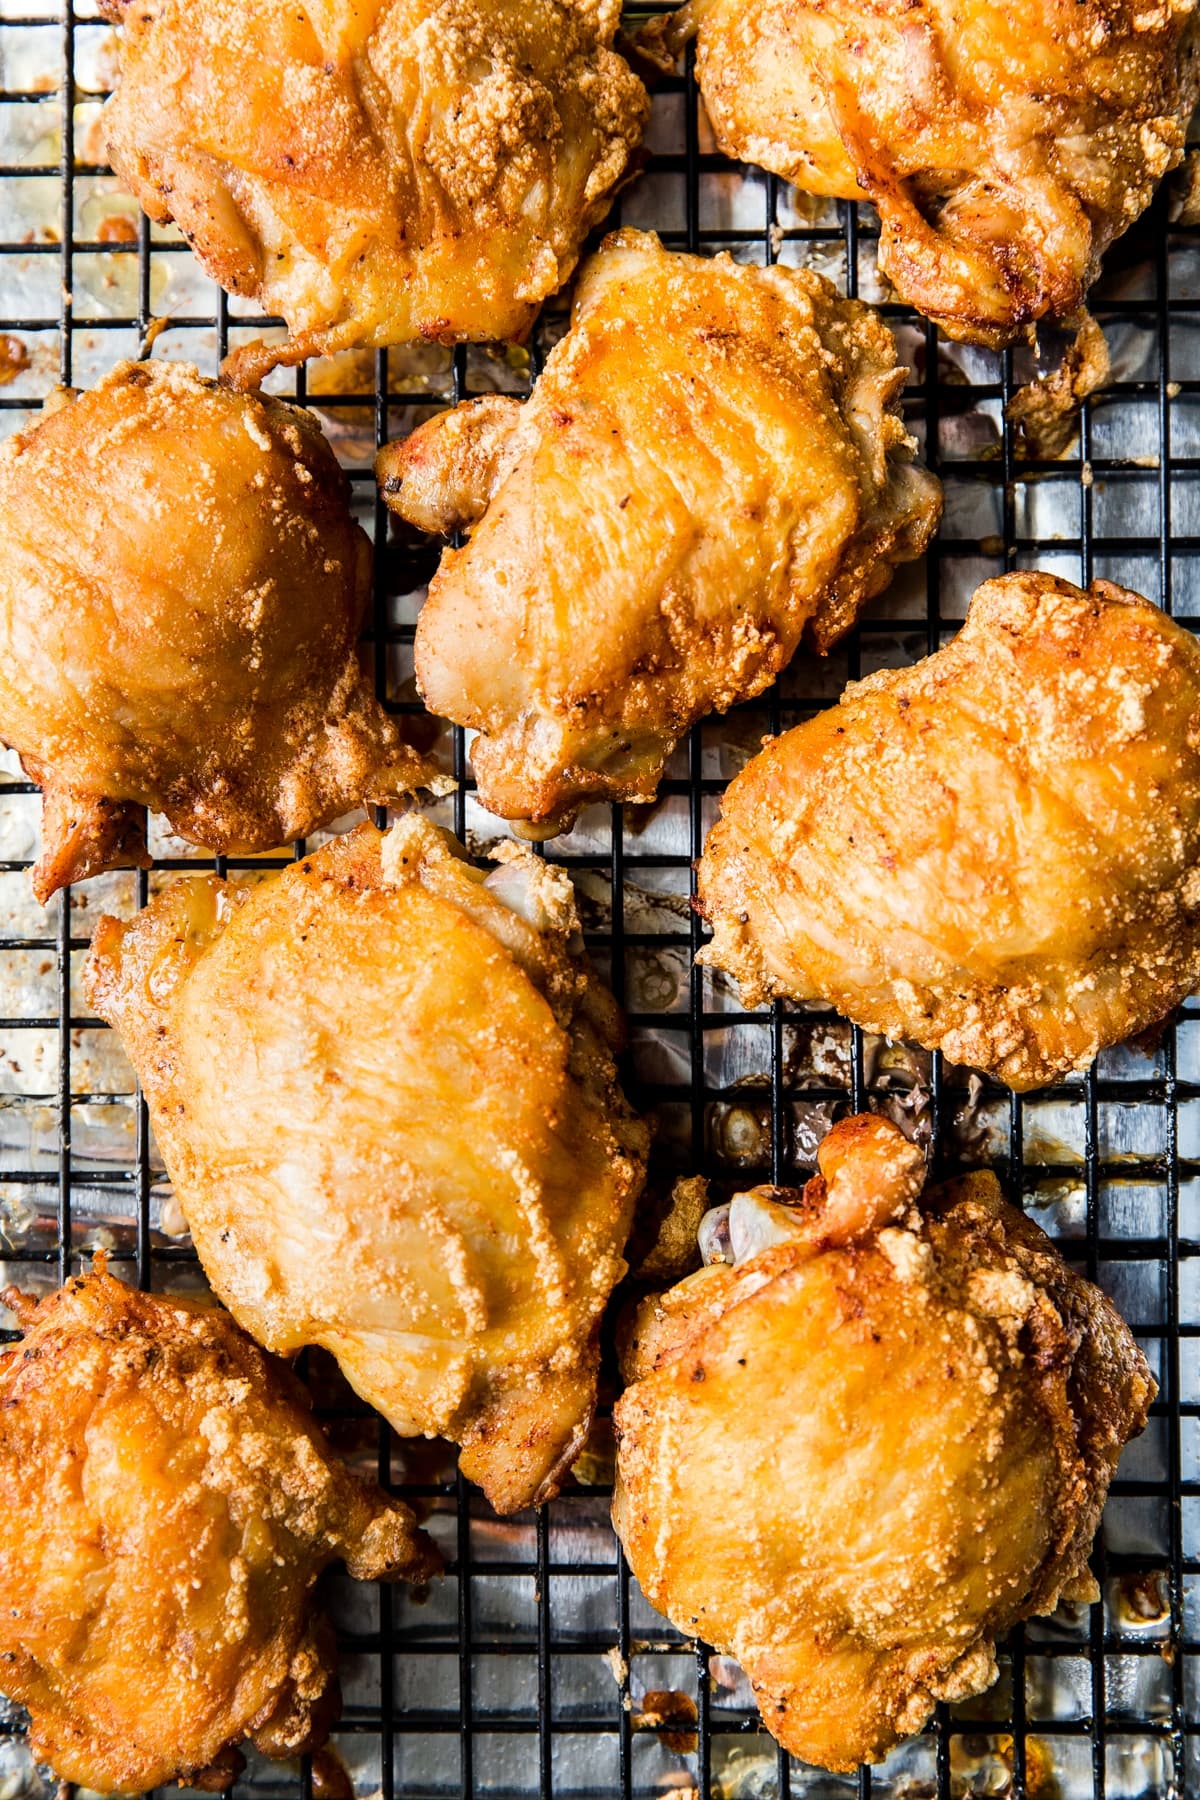 Crispy Baked Chicken Thighs Recipe The Modern Proper,Stair Carpet Protector